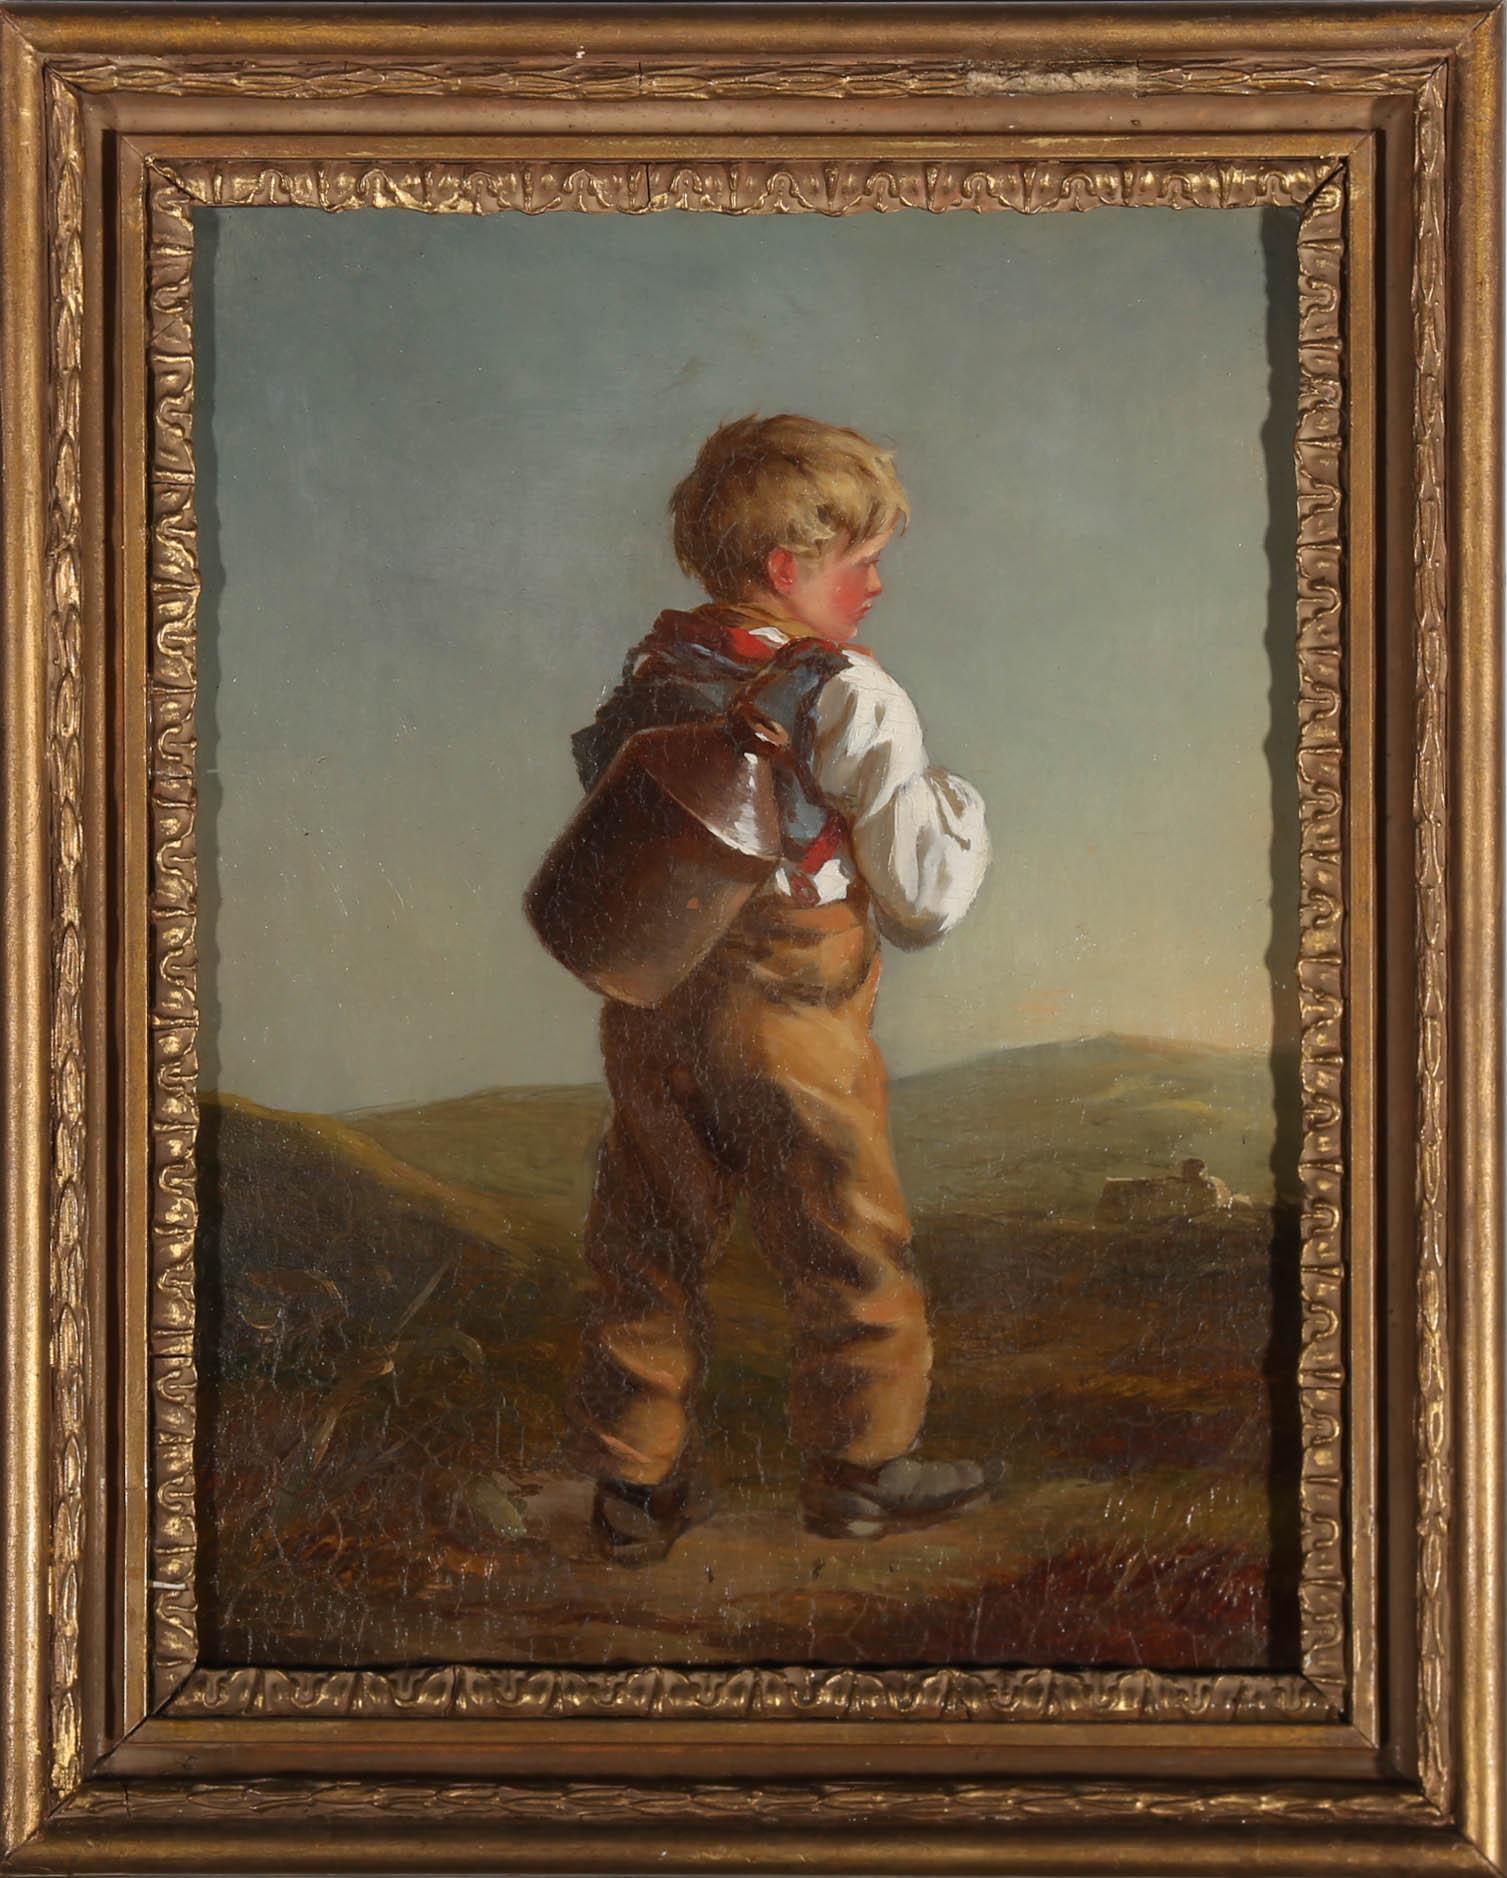 Unknown Portrait Painting - Framed Mid 19th Century Oil - Boy with Flagon